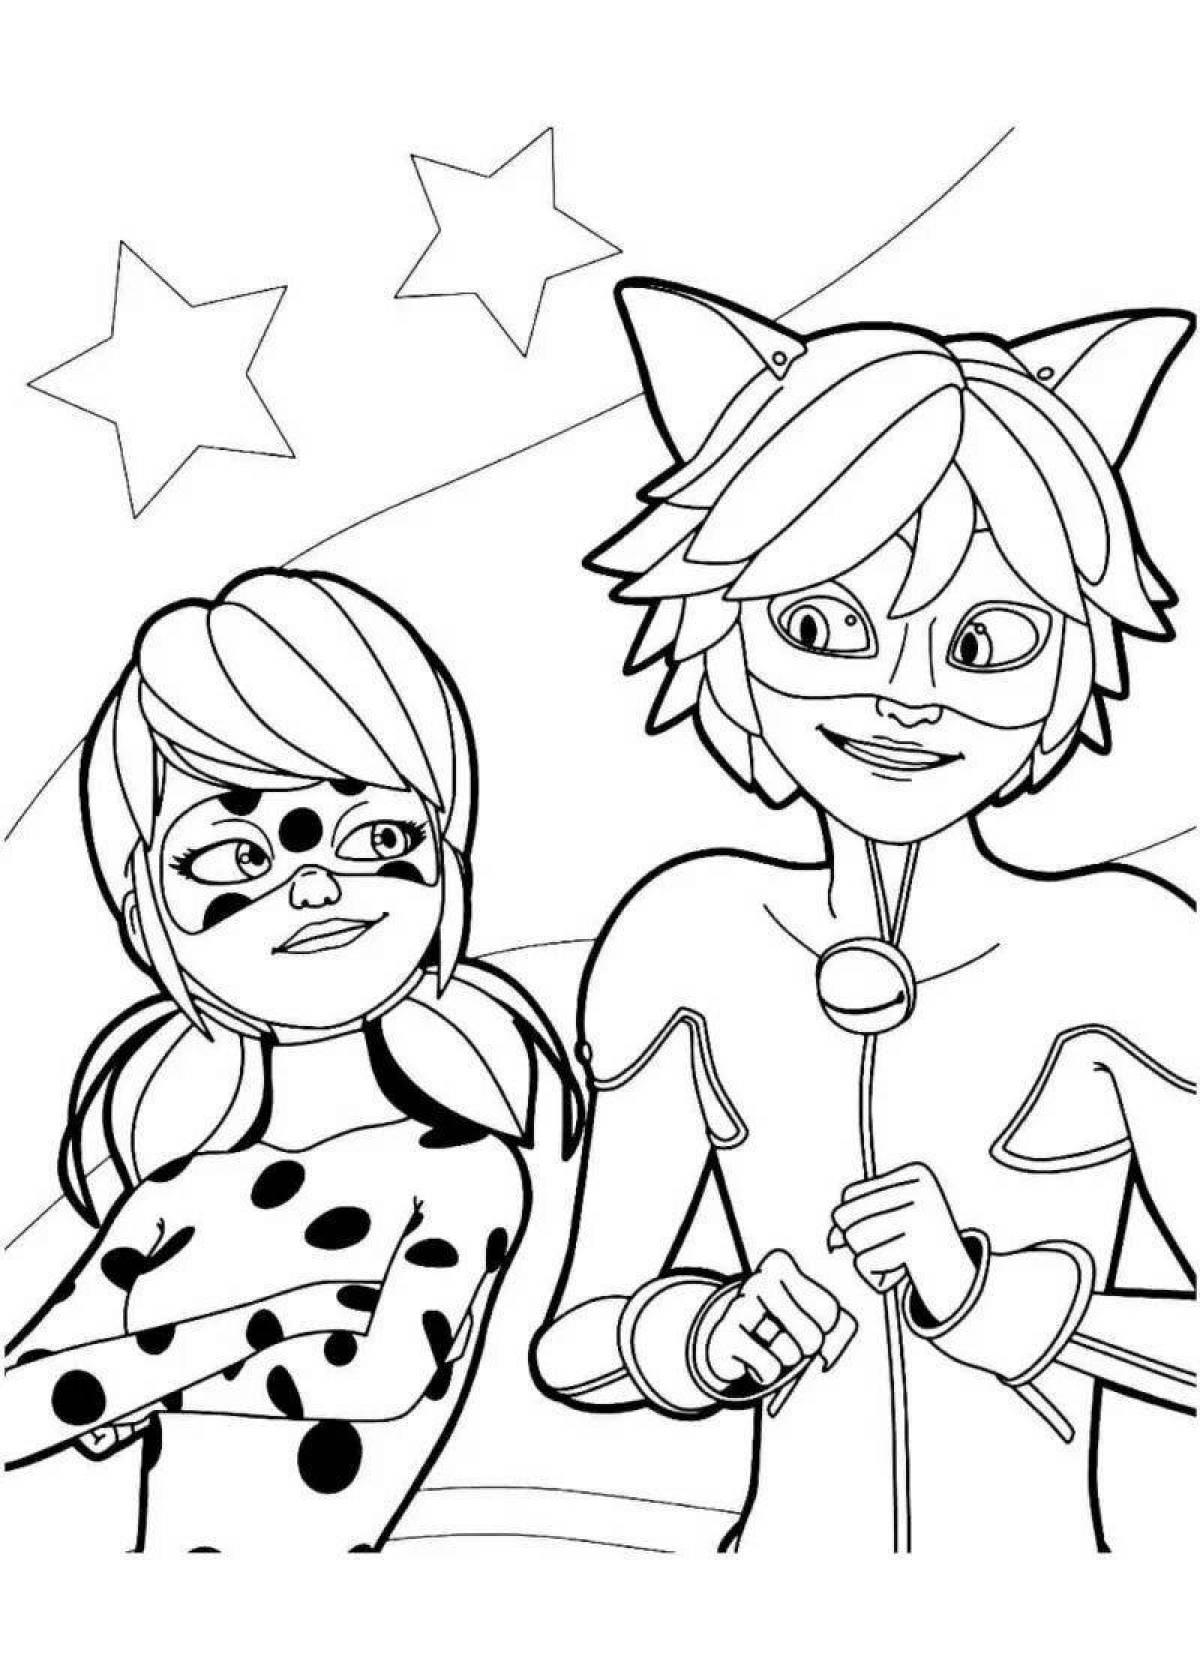 Coloring page glittering ladybug